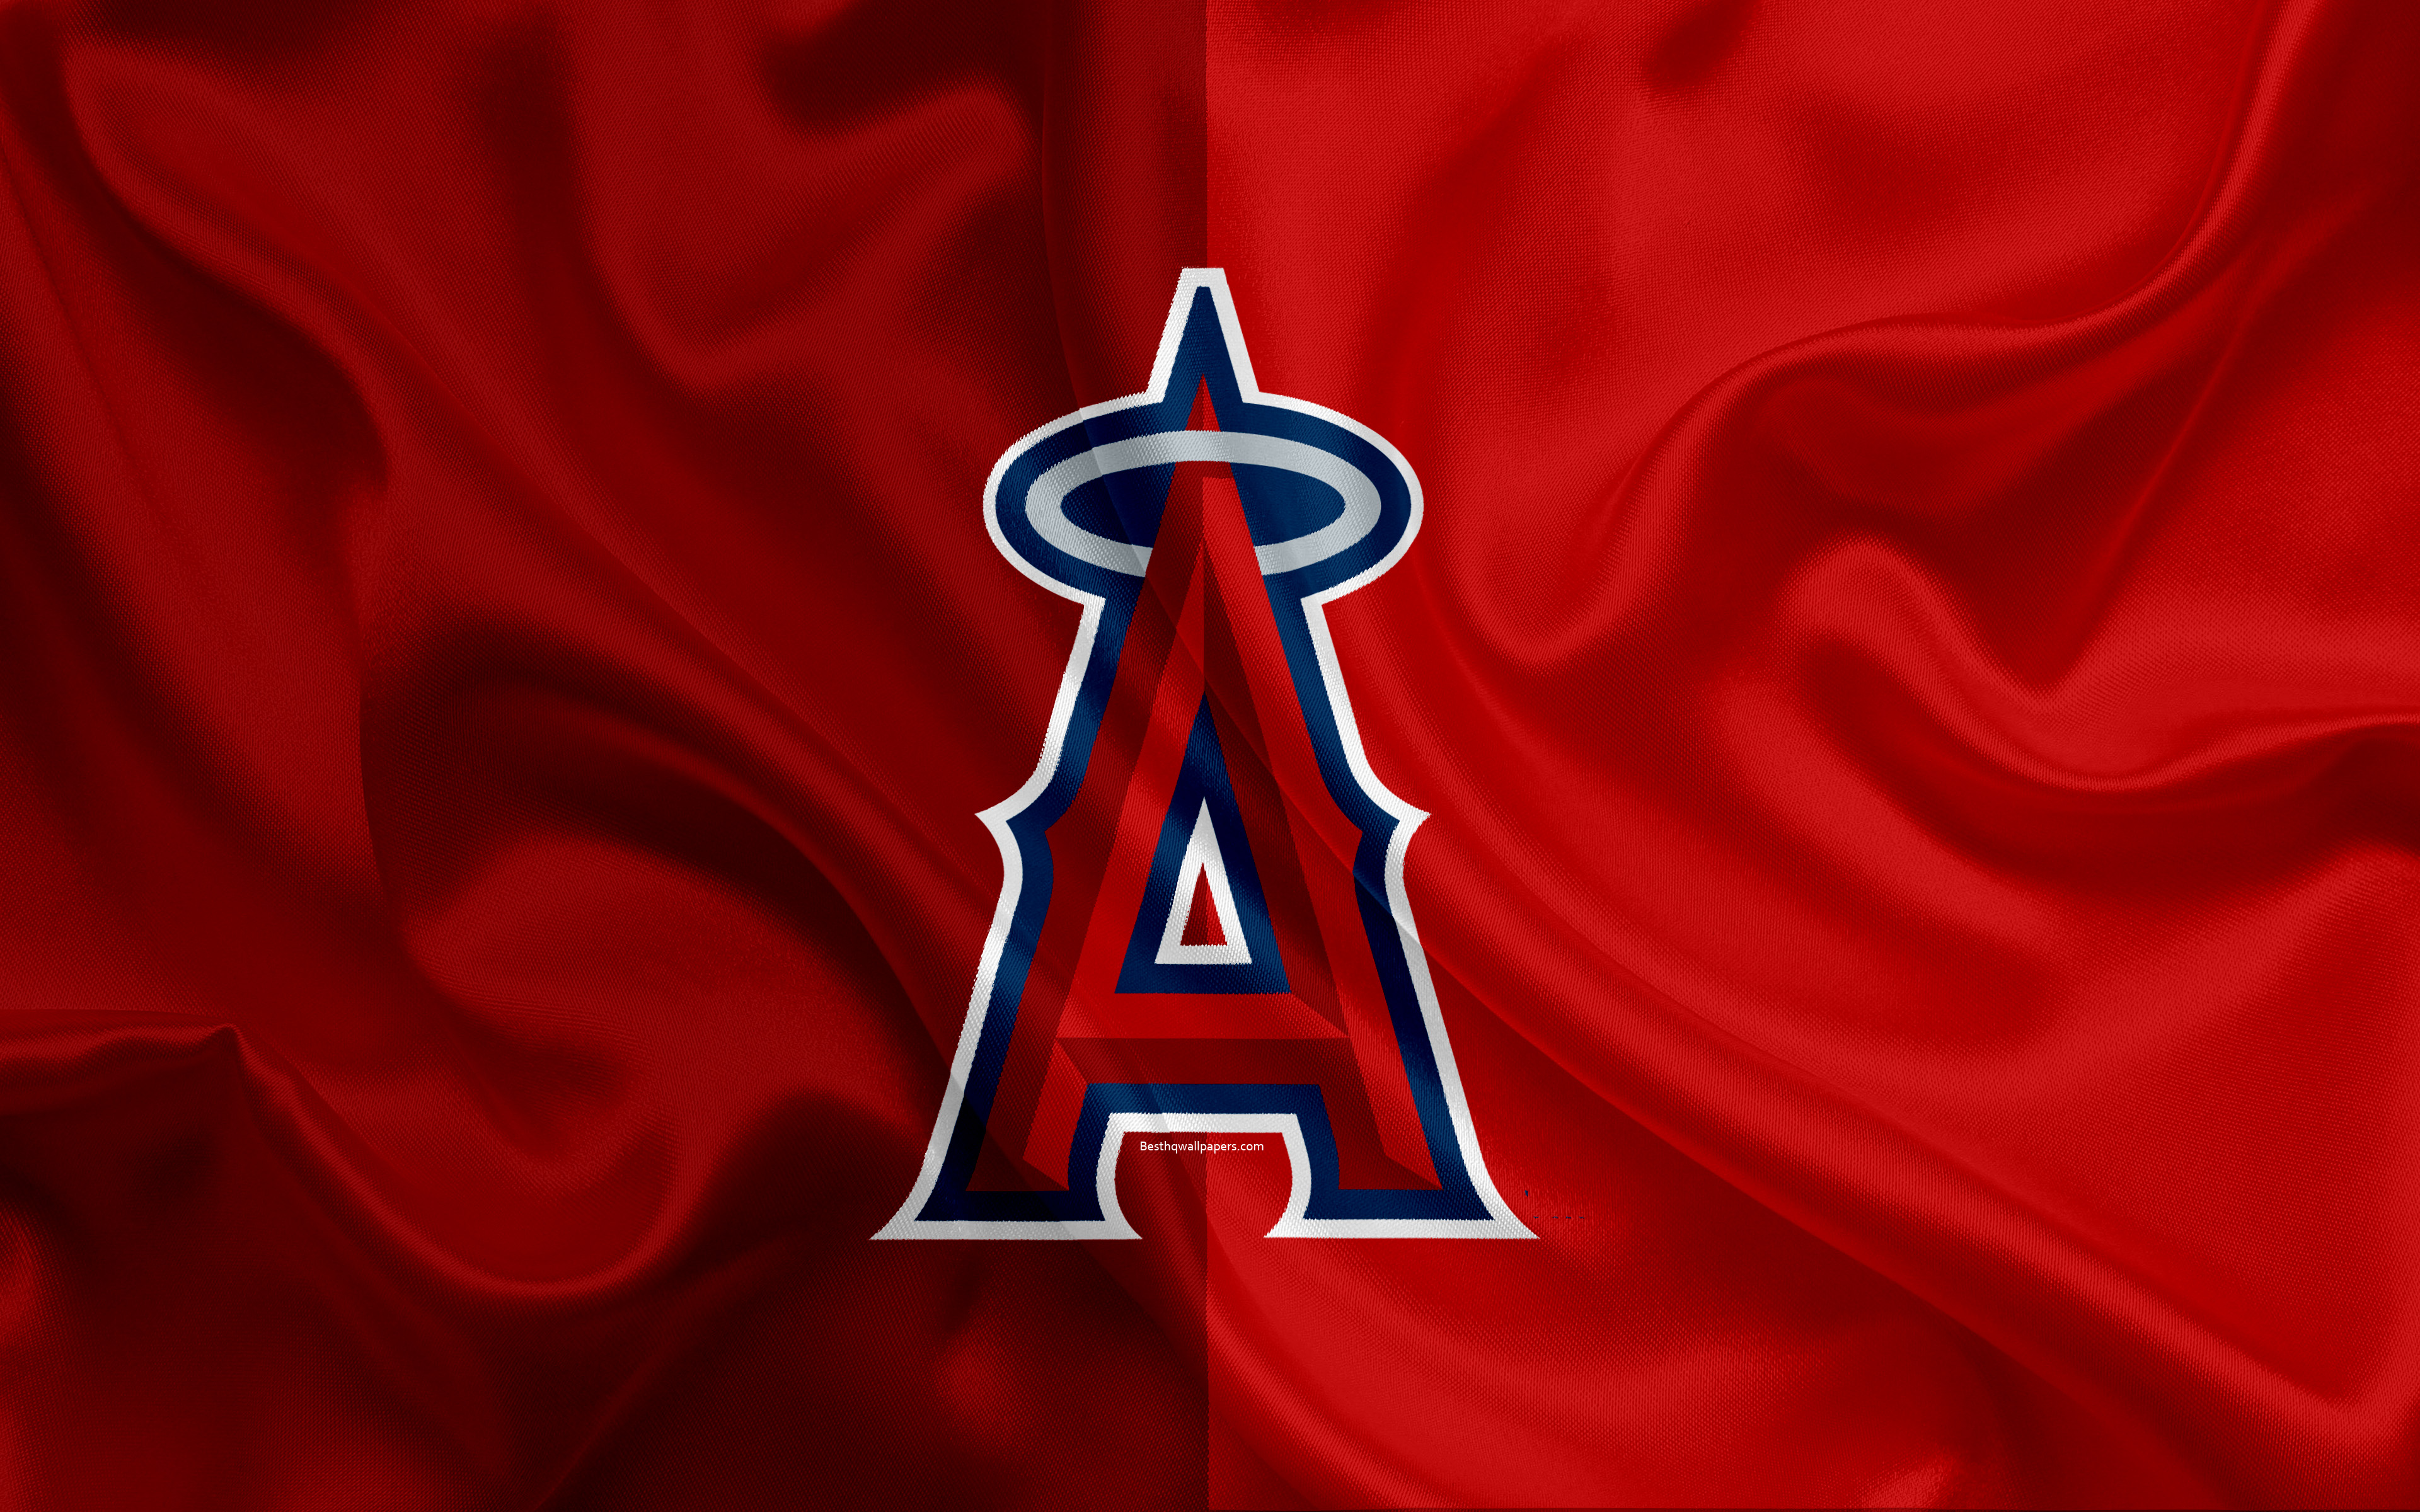 Download wallpaper Los Angeles Angels, 4k, logo, silk texture, american baseball club, green yellow flag, emblem, MLB, Auckland, California, USA, Major League Baseball for desktop with resolution 3840x2400. High Quality HD picture